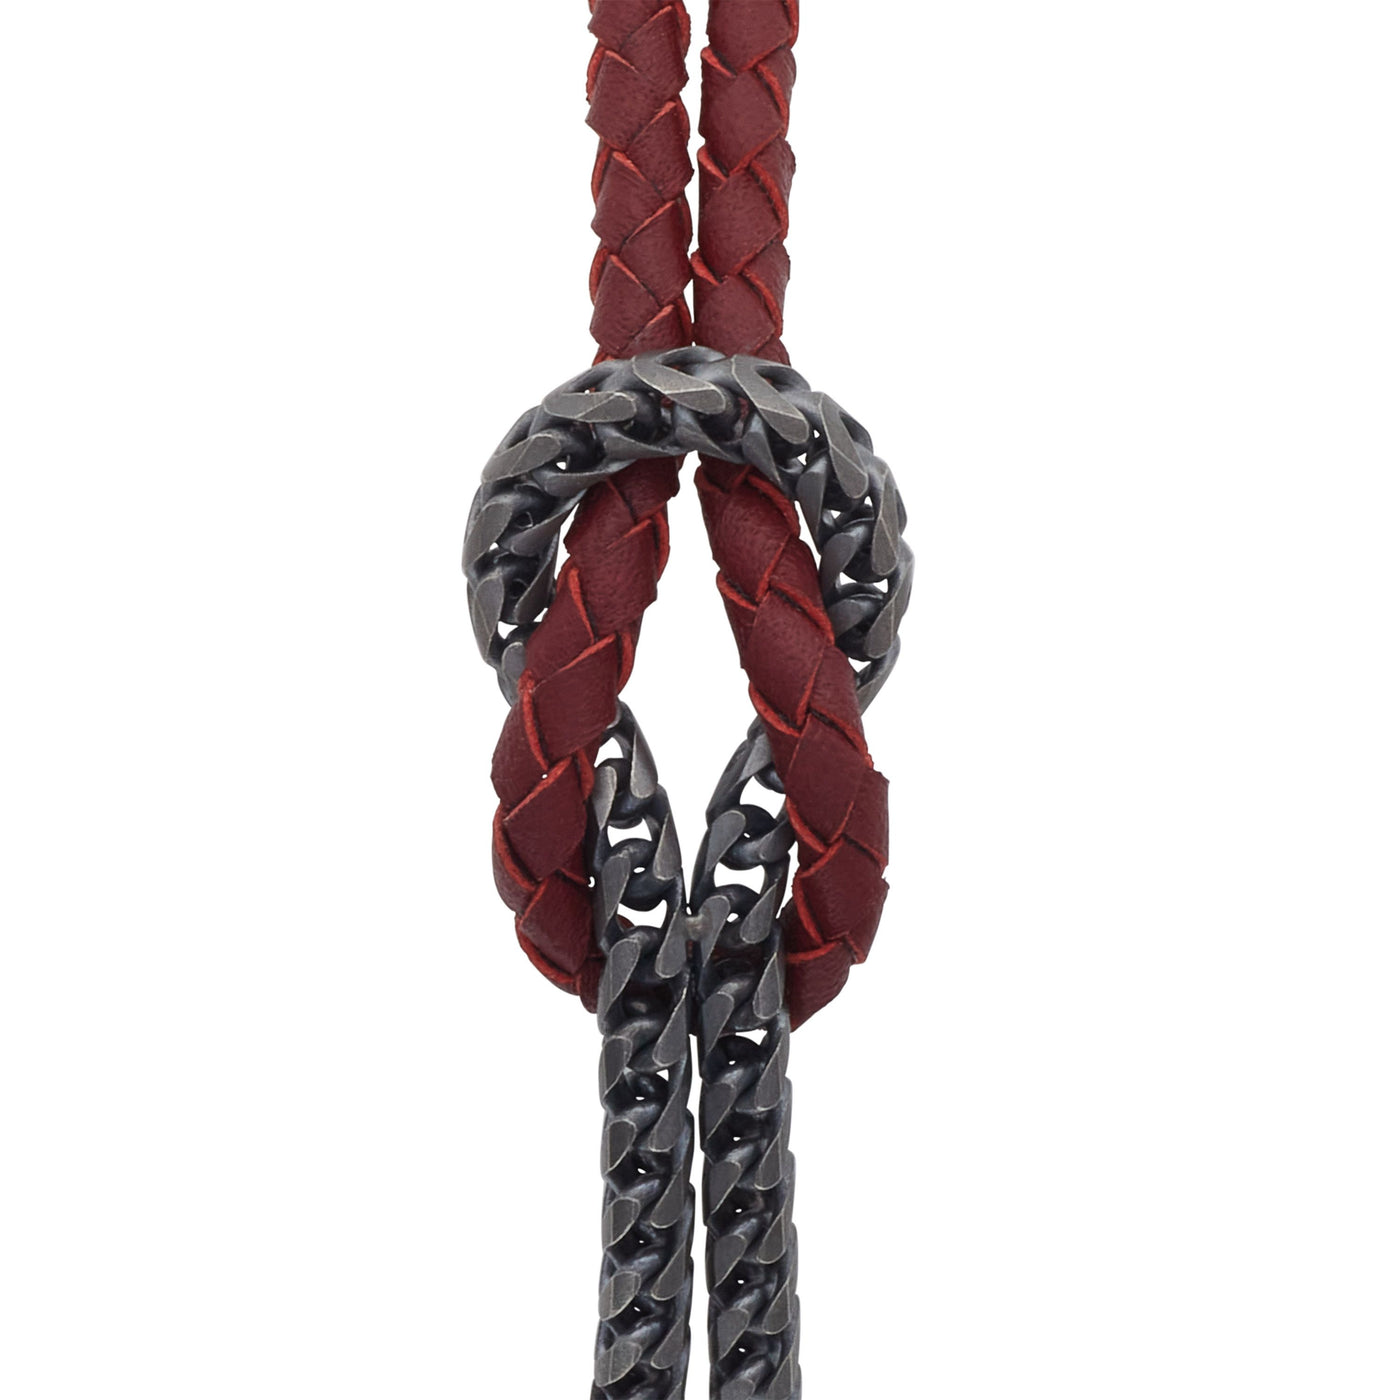 LASH Mix Reef Knot Chain Oxidized Bracelet and red leather